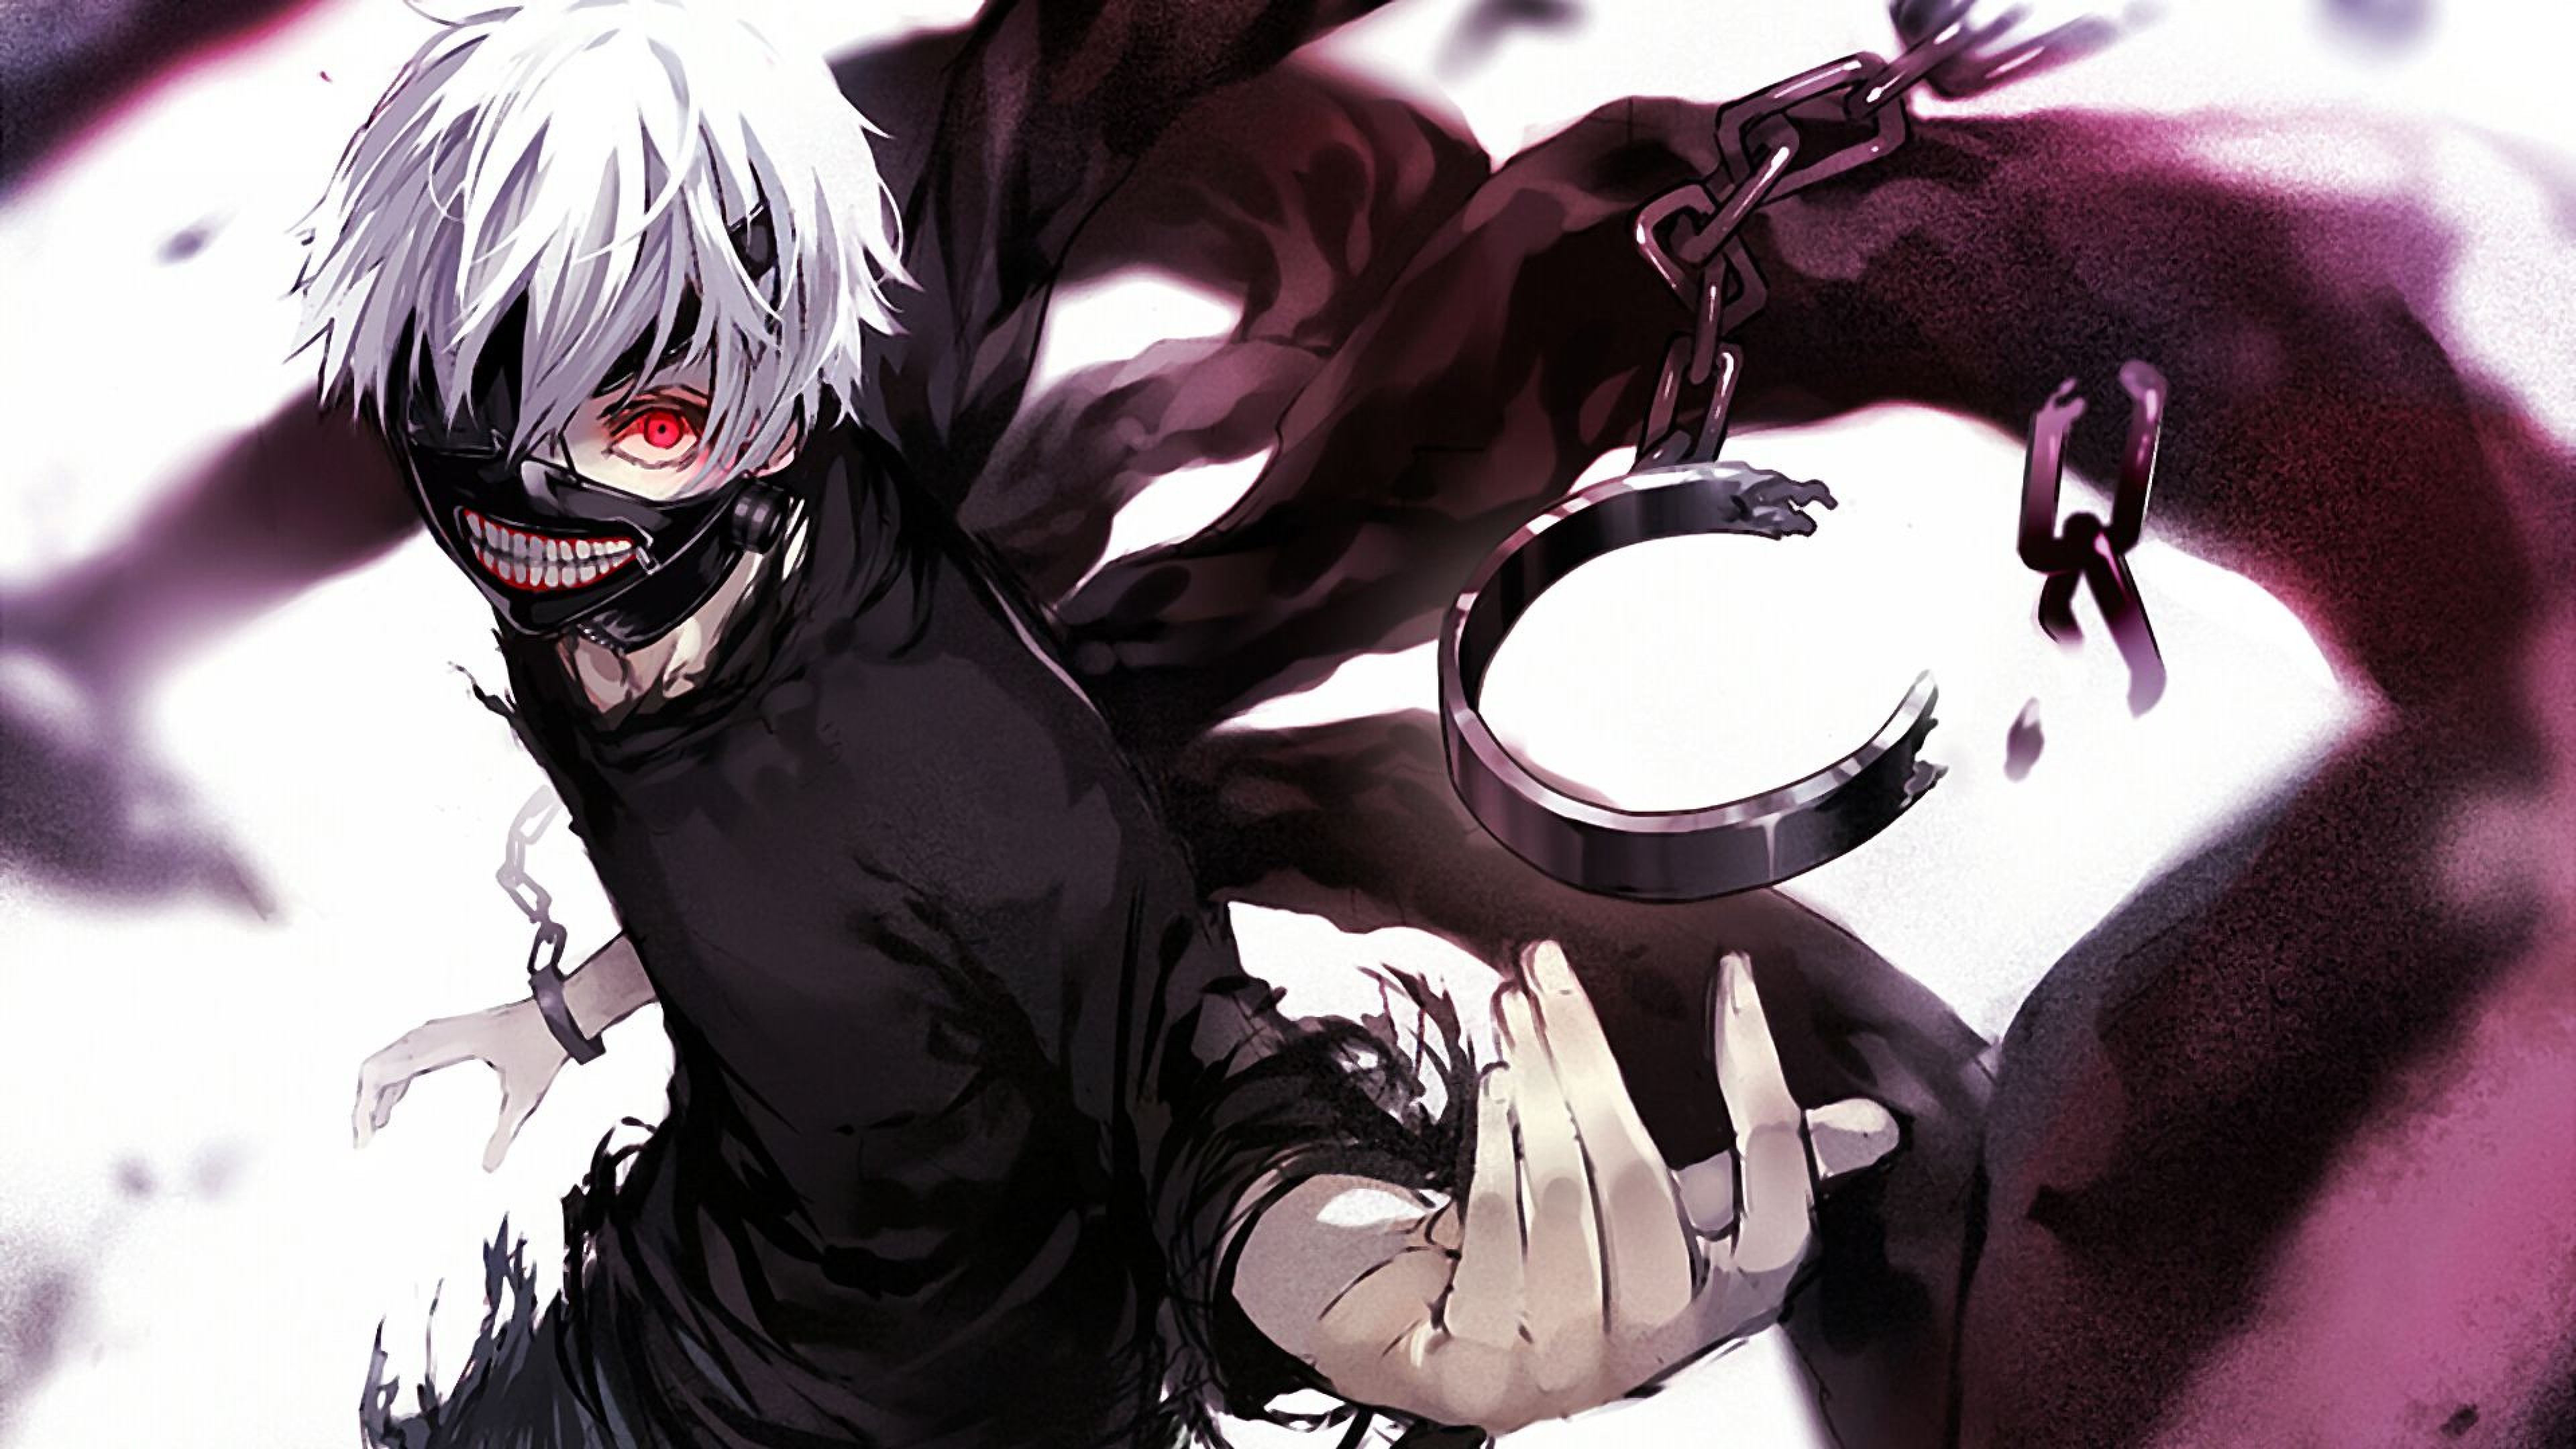 Tokyo Ghoul Anime Hd Wallpaper For Desktop And Mobiles 4k Ultra Hd